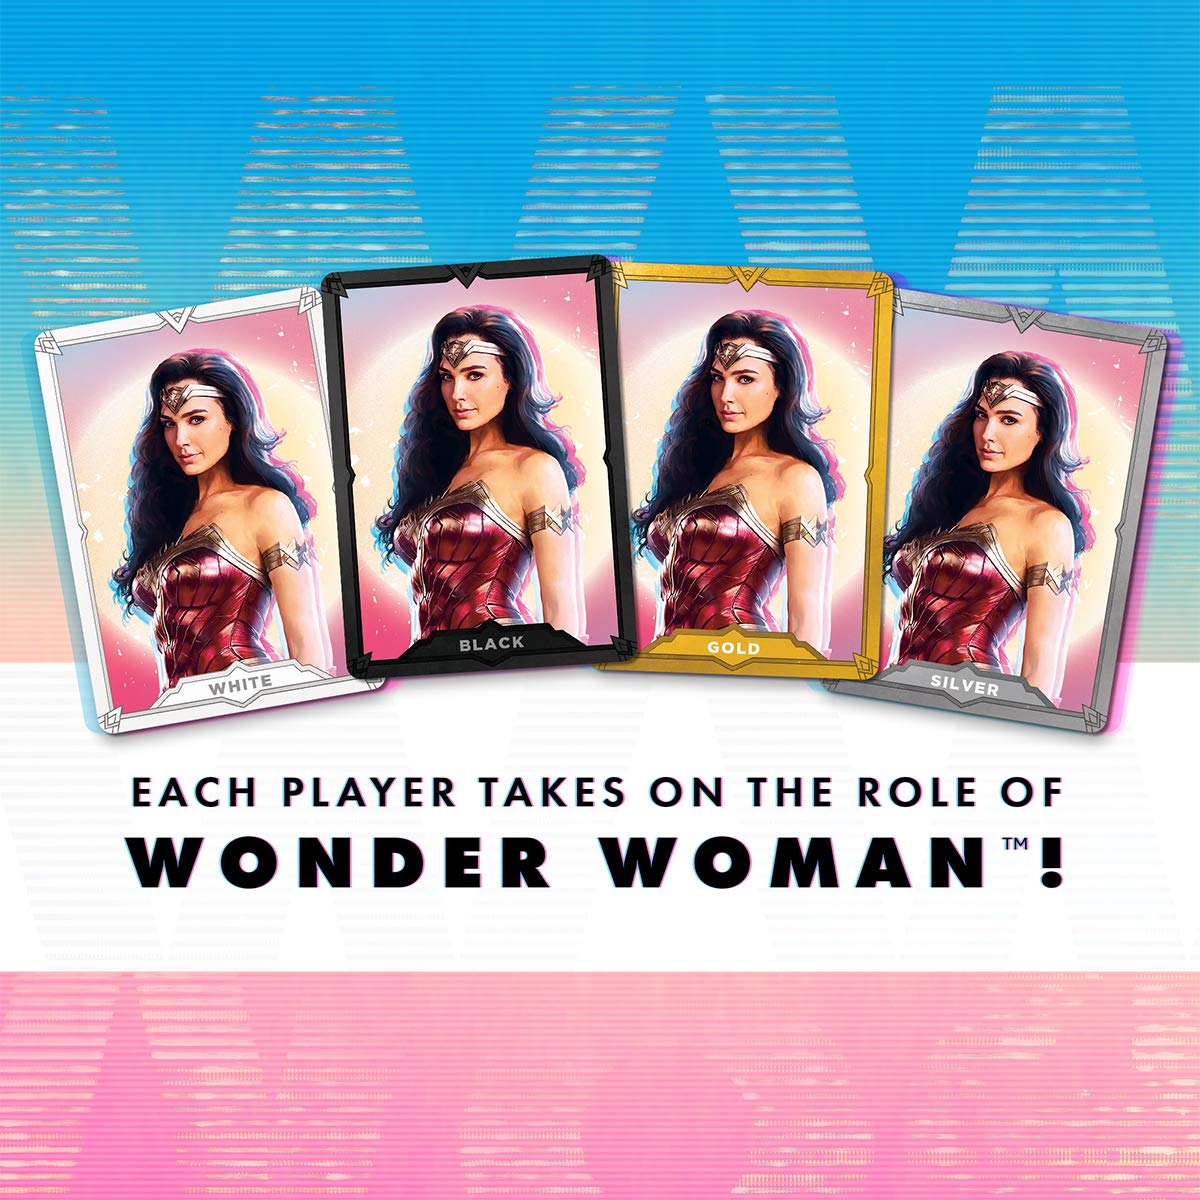 Cryptozoic Entertainment Wonder Woman 1984 Card Game - Be The Super Hero and Save The Most Civilians to Win - DC Comics - for 2 to 4 Players - Ages 14+